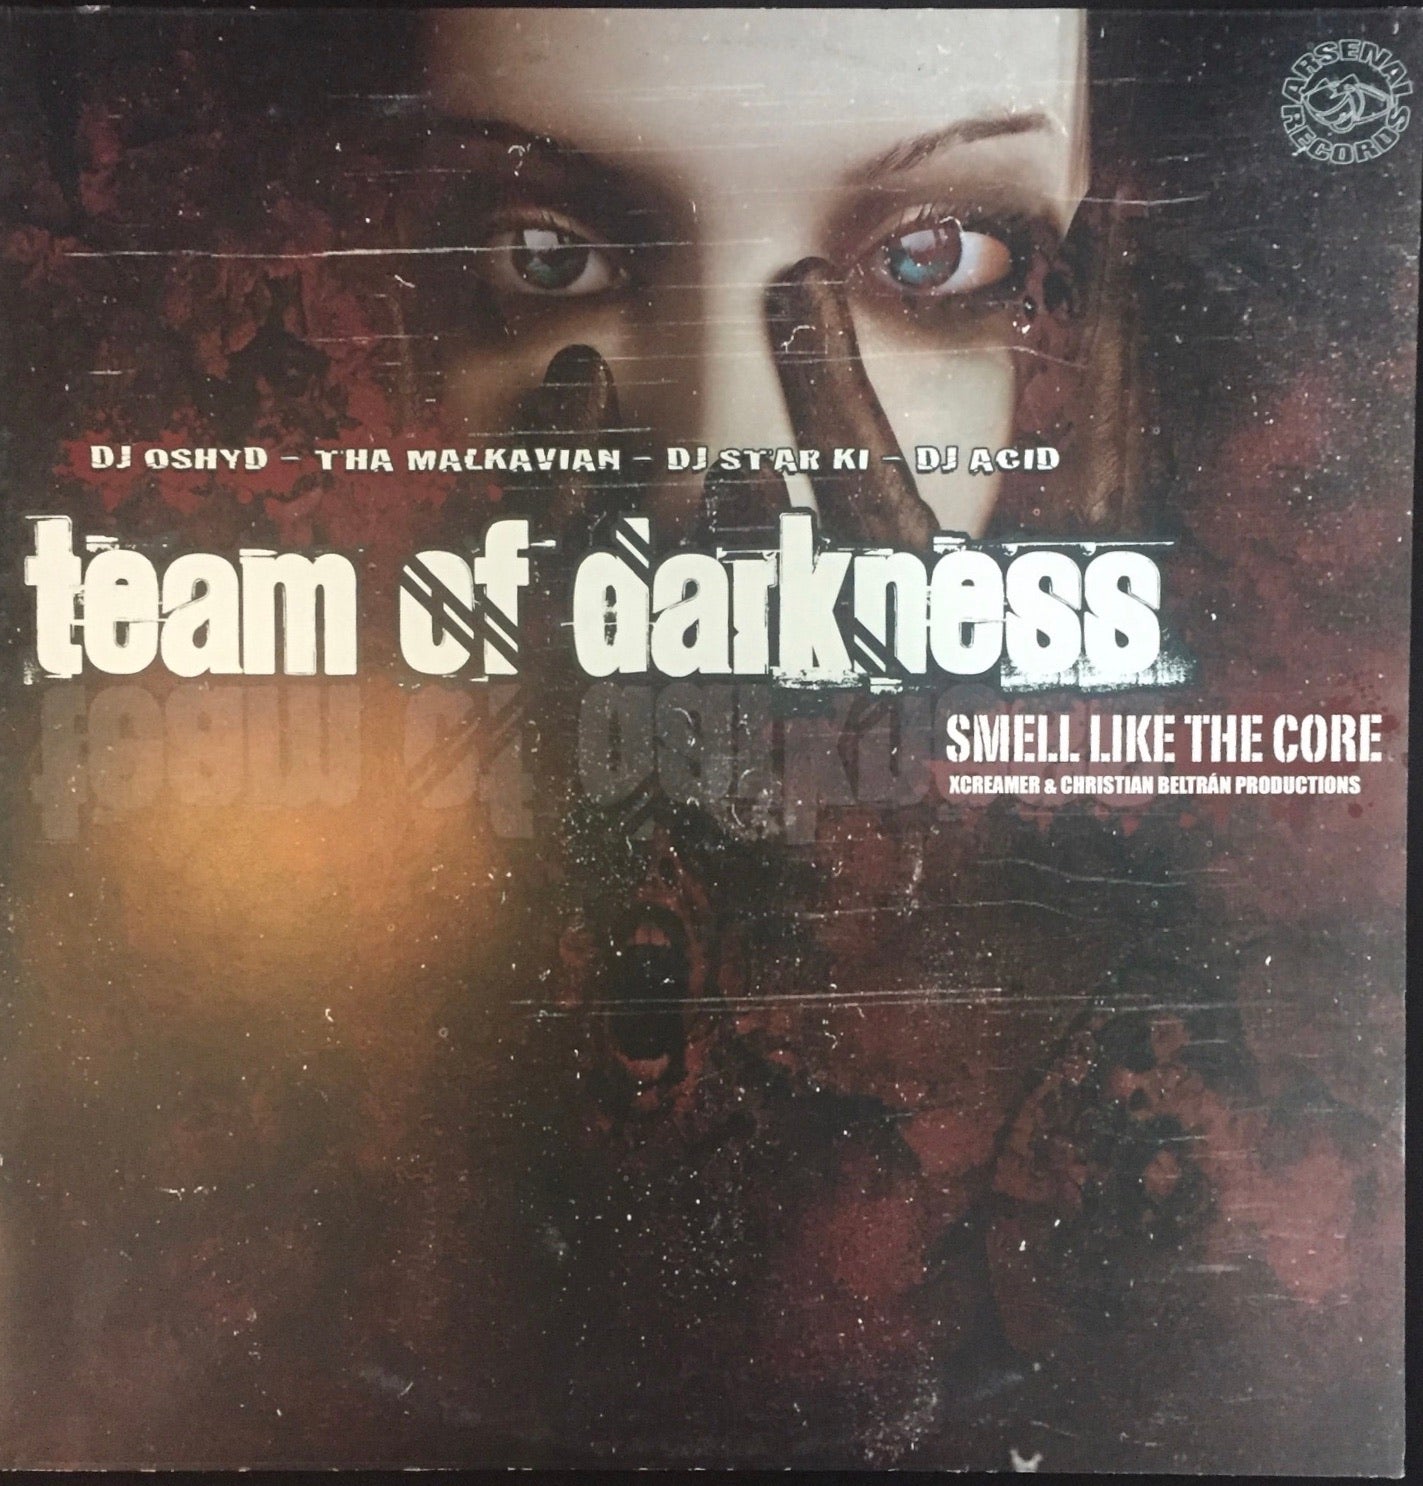 Vinilo Team of Darkness.- SMELLS LIKE THE CORE